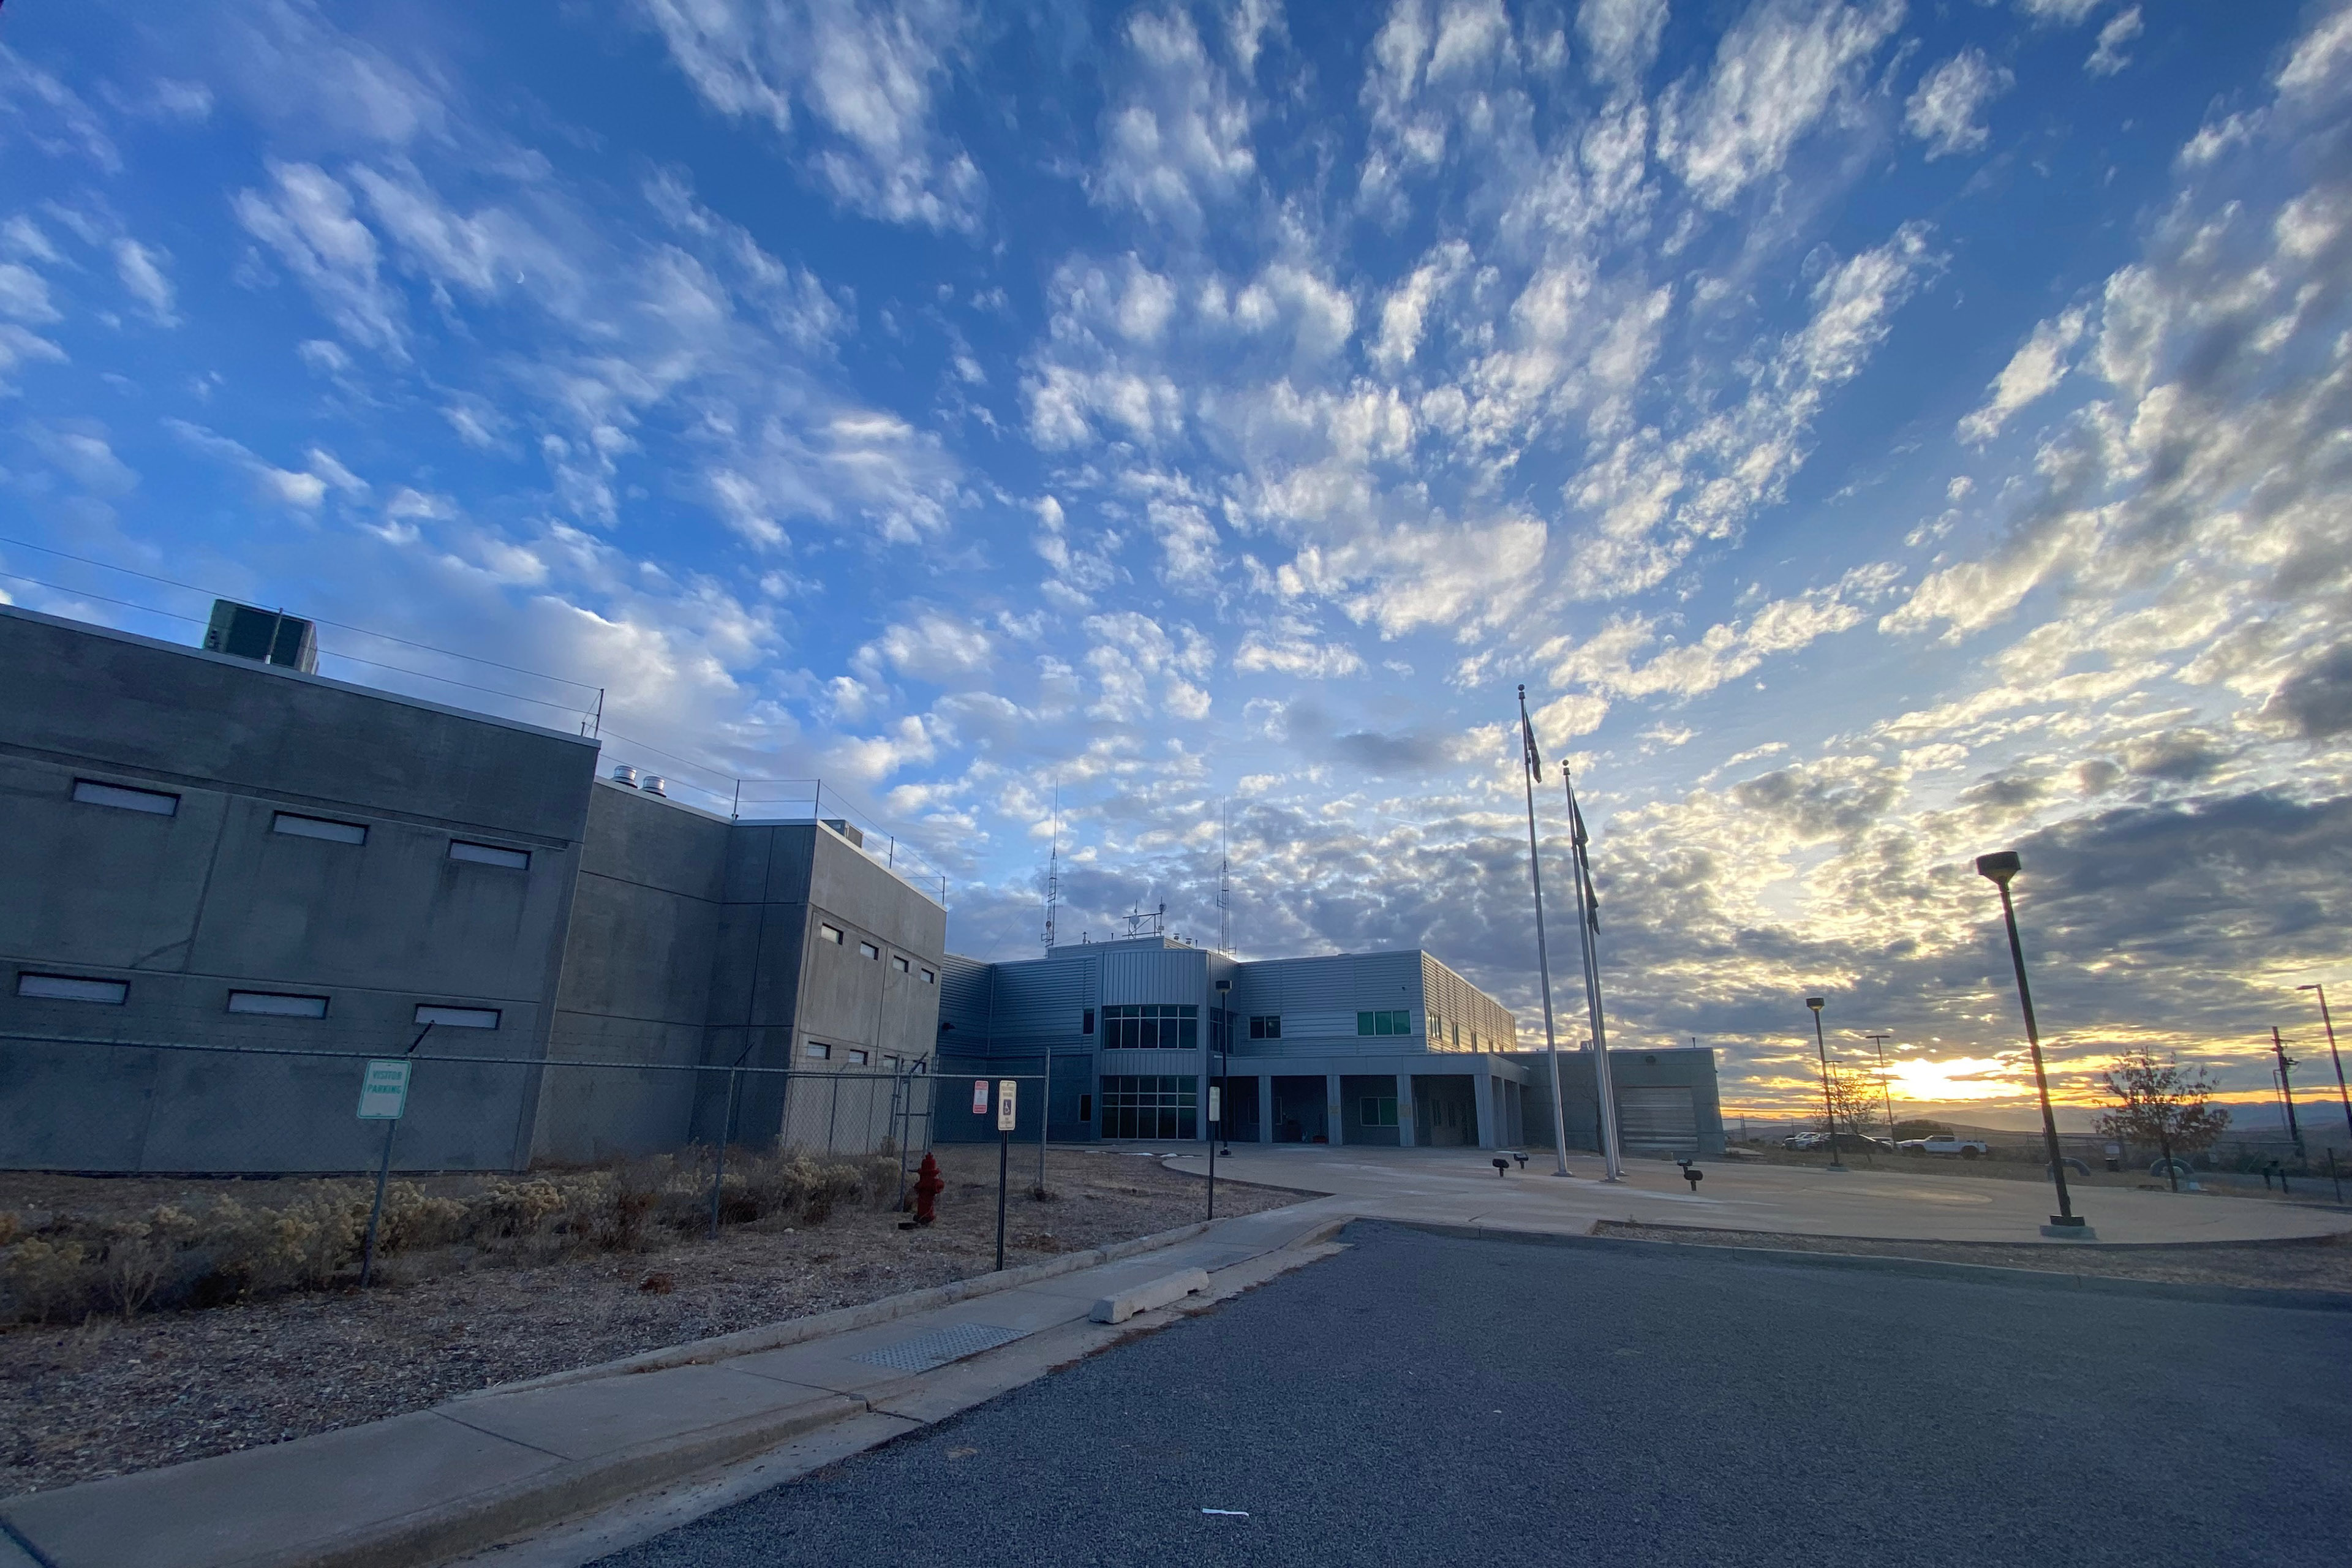 The sun rises over the Sanpete County Jail and Sheriff’s Office outside Manti, Utah. The sky is a soft blue, dappled with small white clouds.